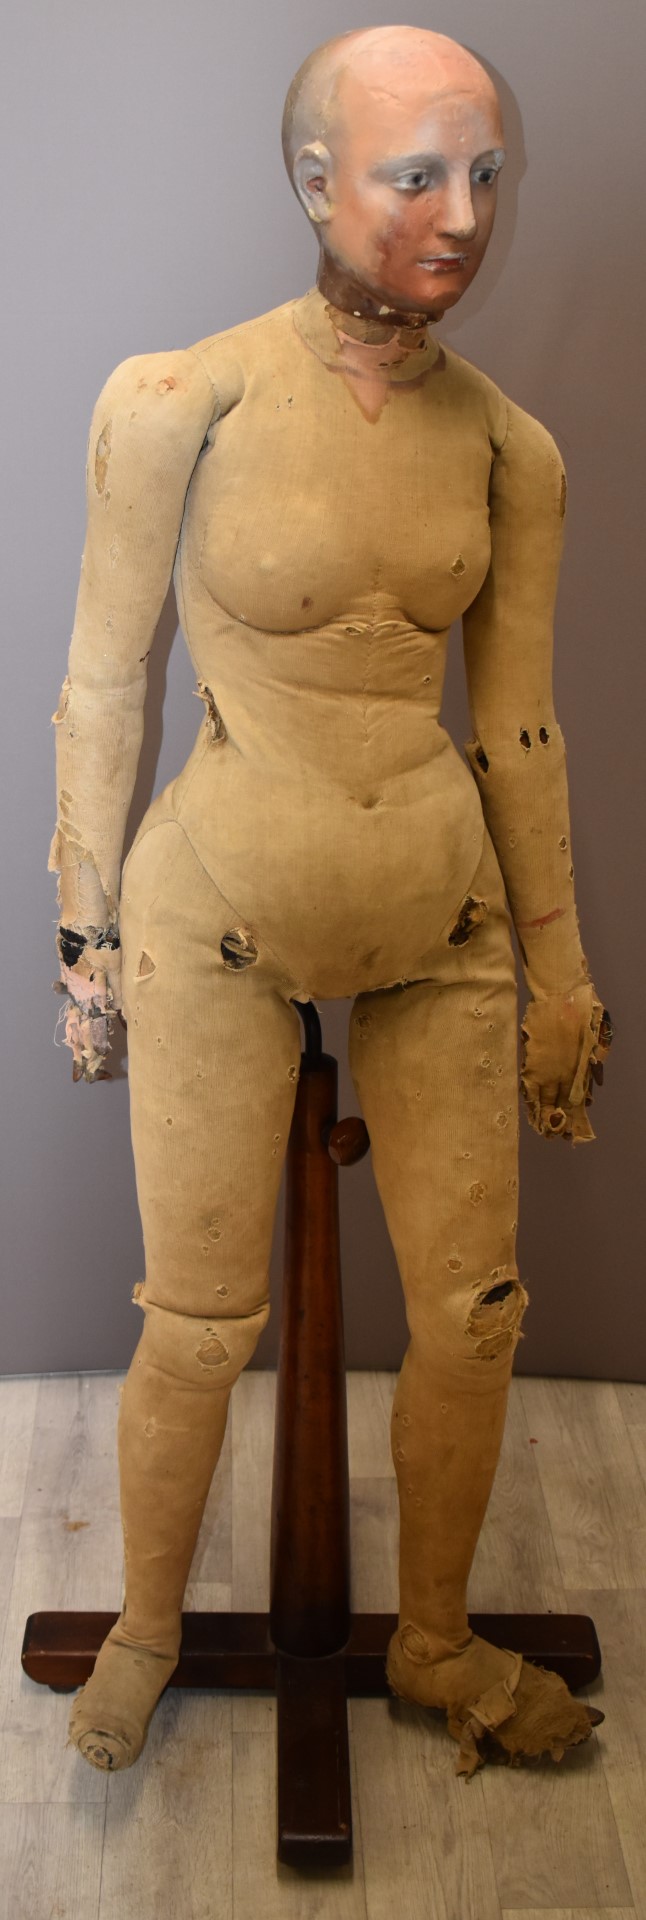 Victorian female lay figure / silent partner, possibly made to measure as constructed to ride side